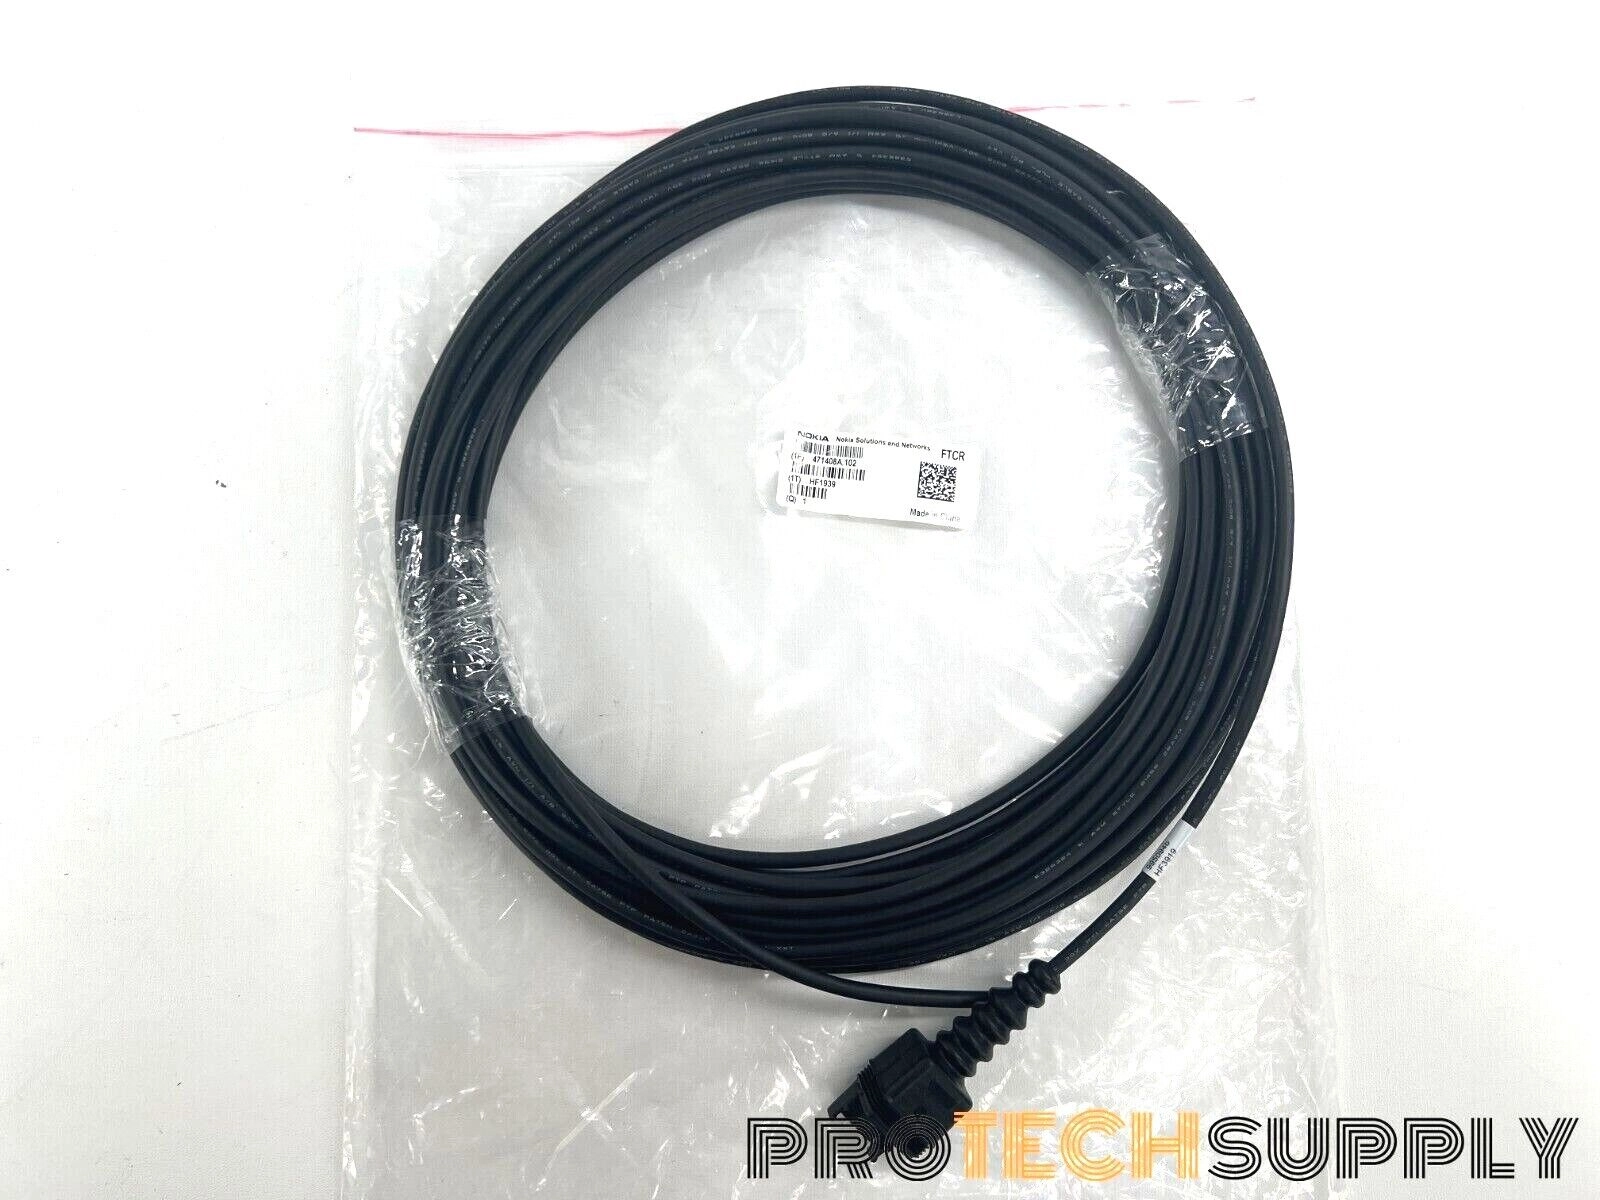 NEW Nokia FTCR OD 15m Ethernet Cable 471408A.102 w